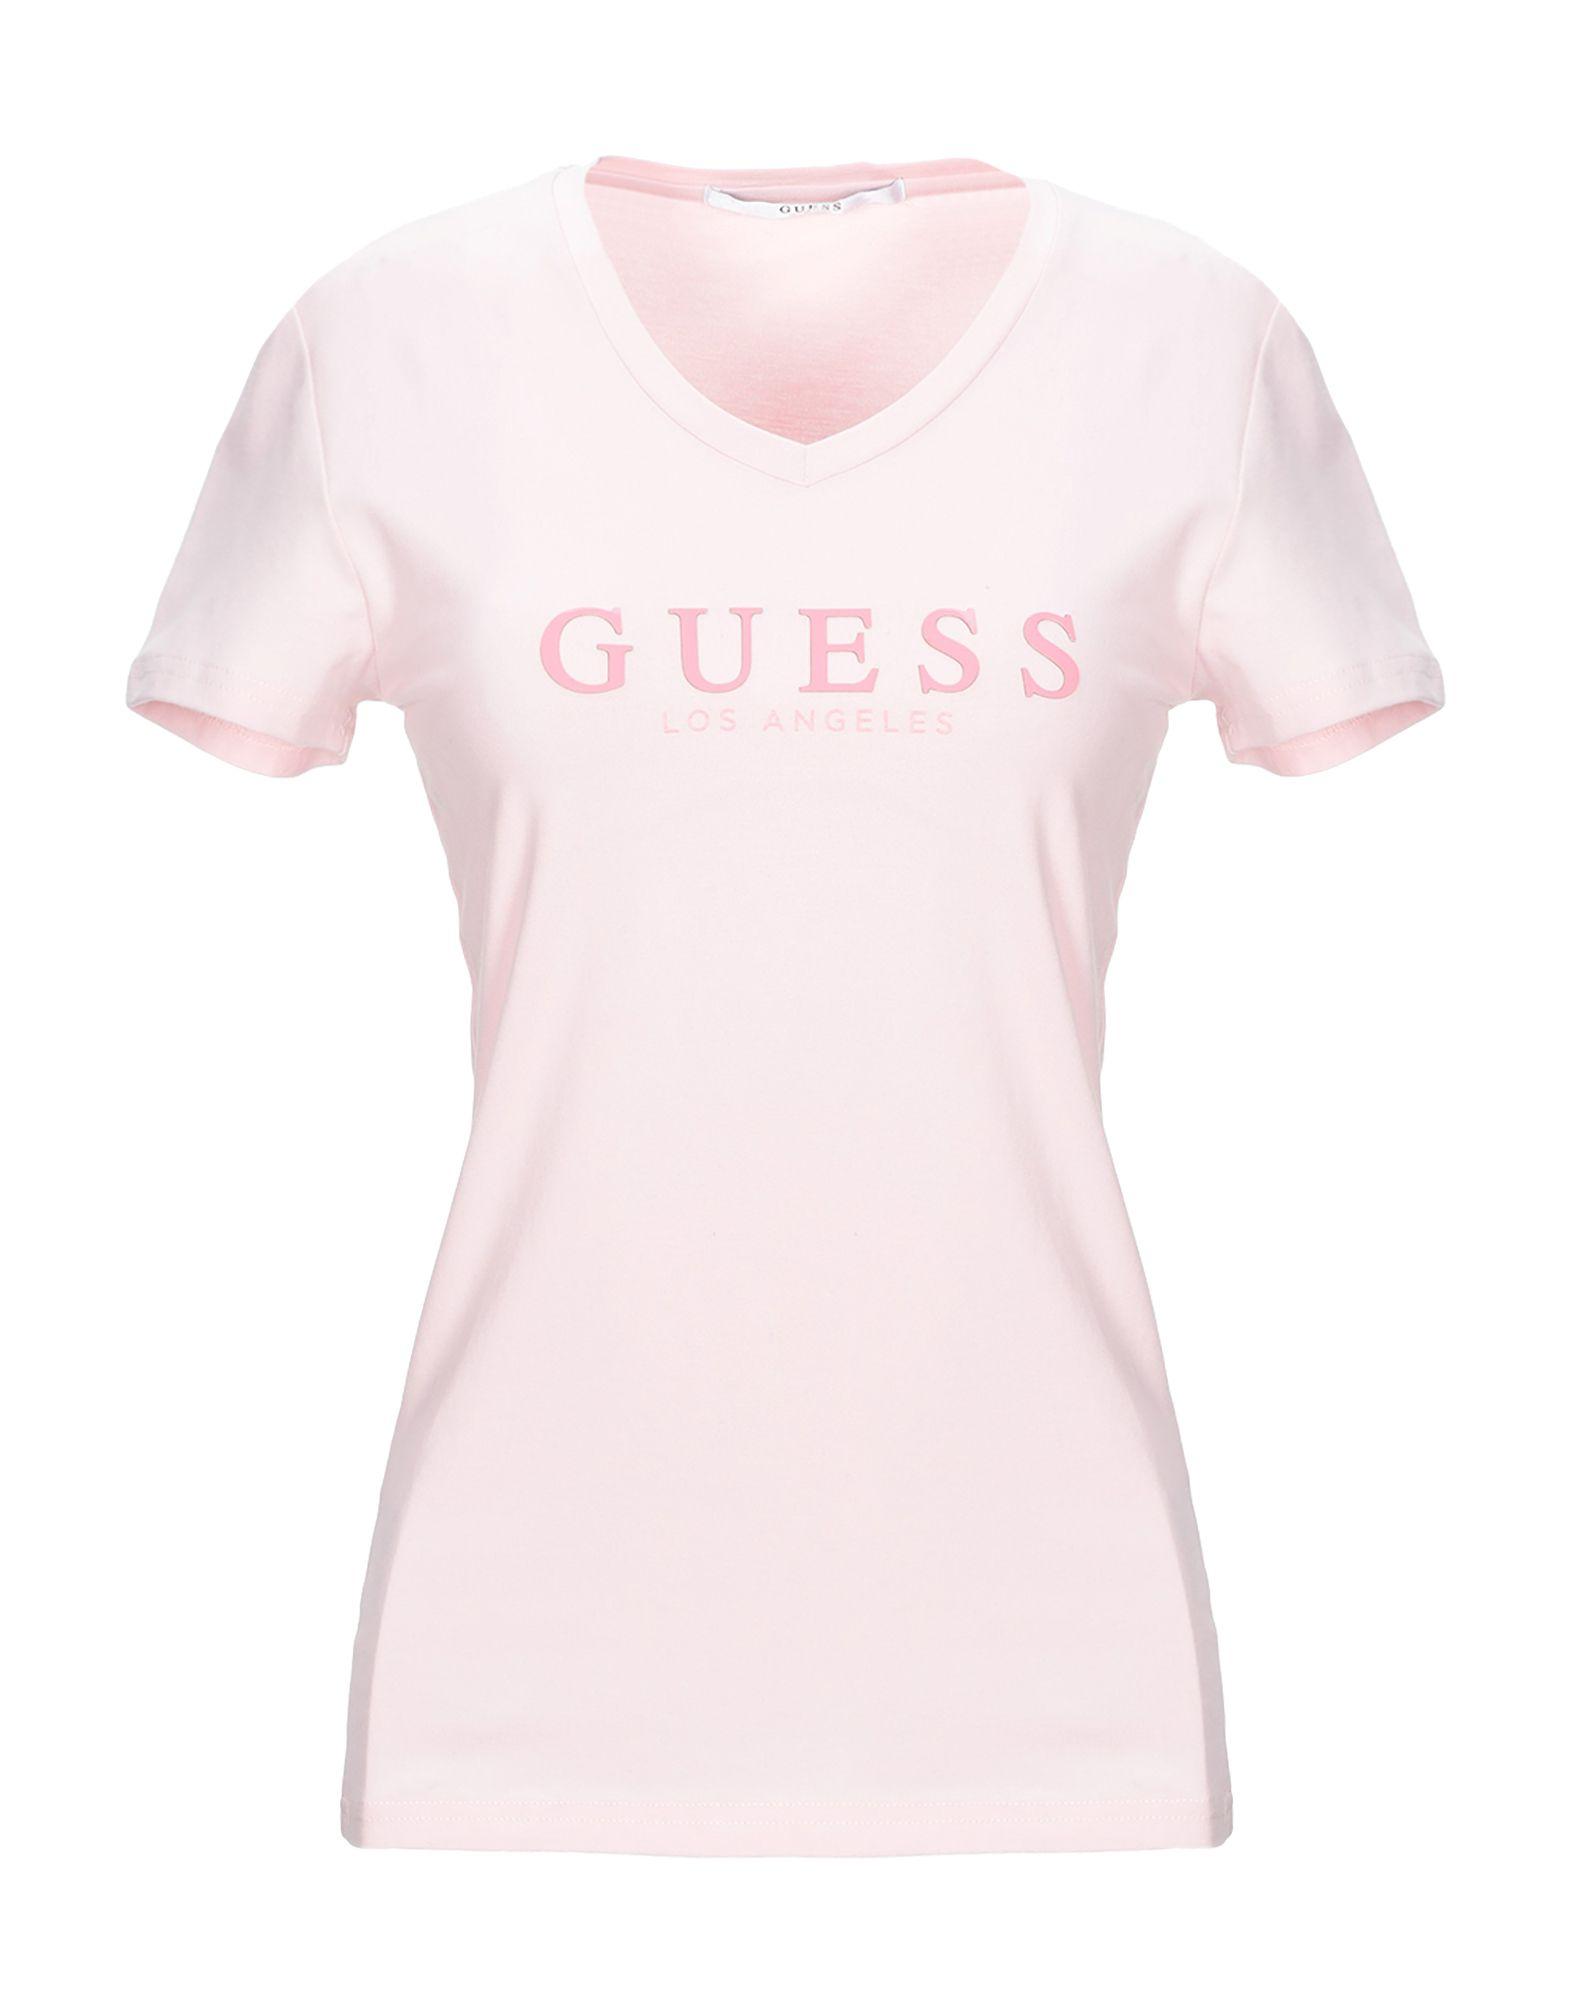 Guess T-shirt in Pink - Lyst